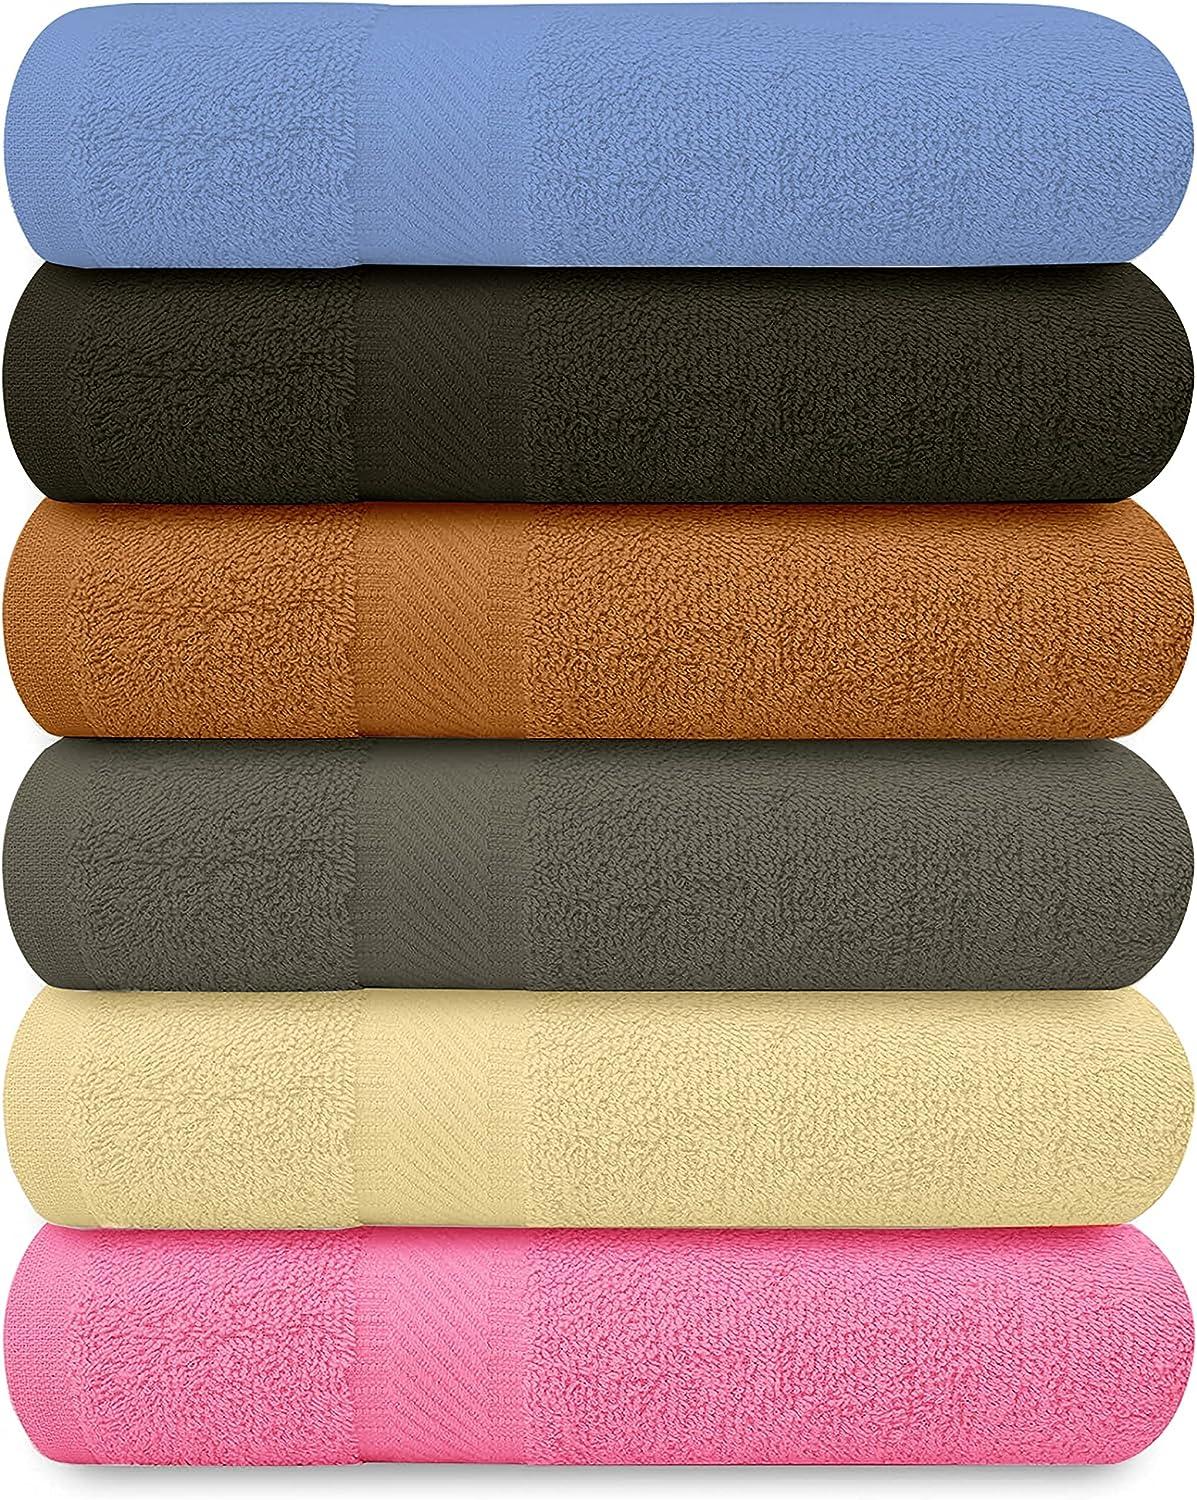 Towel and Linen Mart 100% Cotton 6 Pack Bath Towel Set, Quick Dry, Super  Absorbent, Light Weight, Soft, Multi Colors (27 x 54 Pack of 6) - Yahoo  Shopping